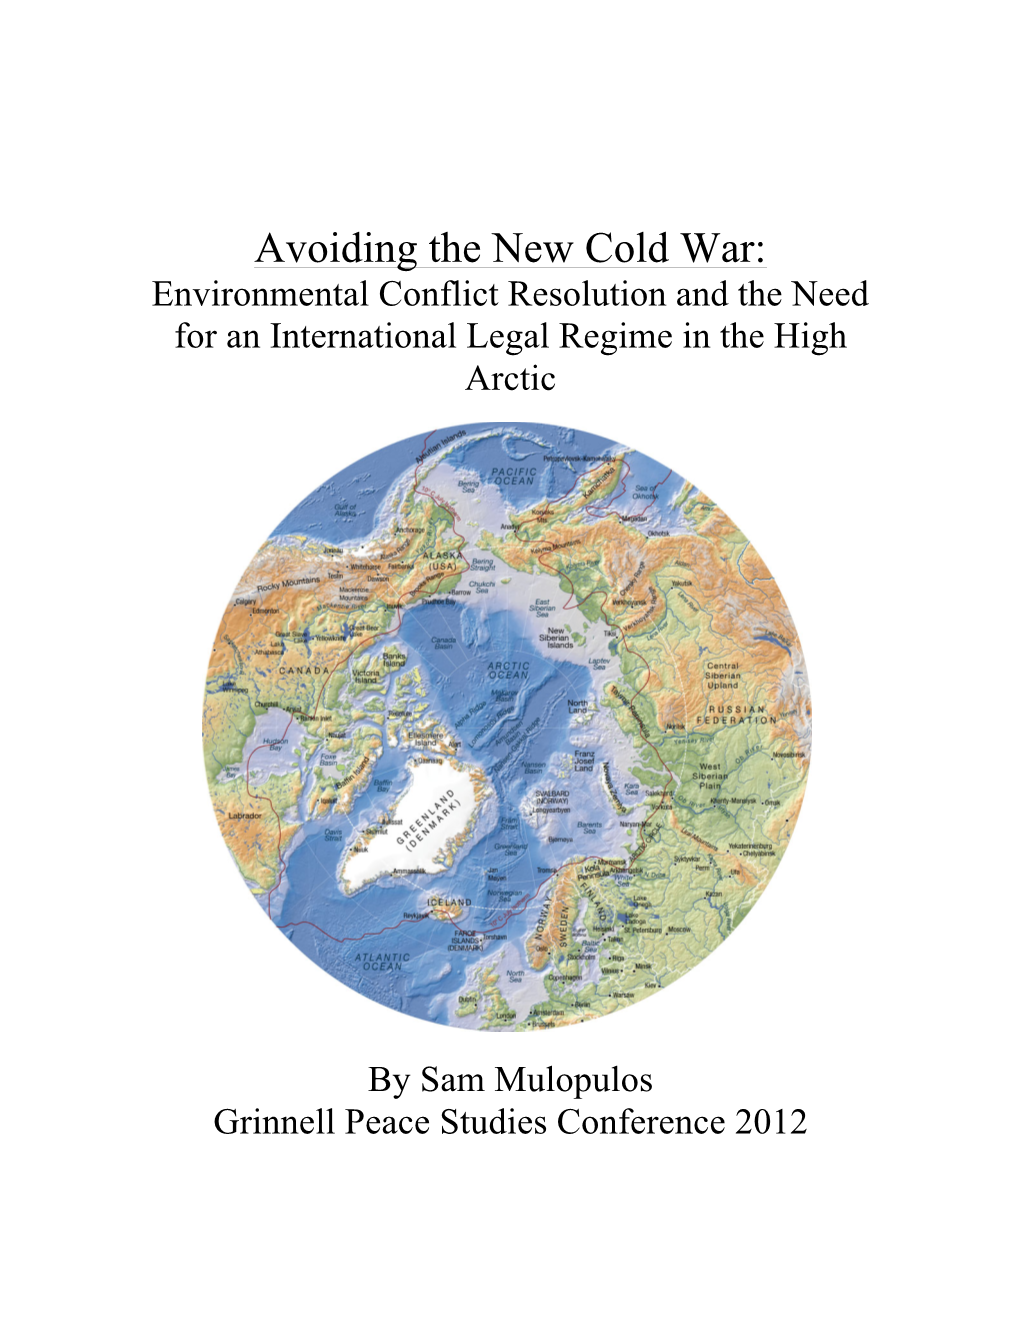 Avoiding the New Cold War: Environmental Conflict Resolution and the Need for an International Legal Regime in the High Arctic